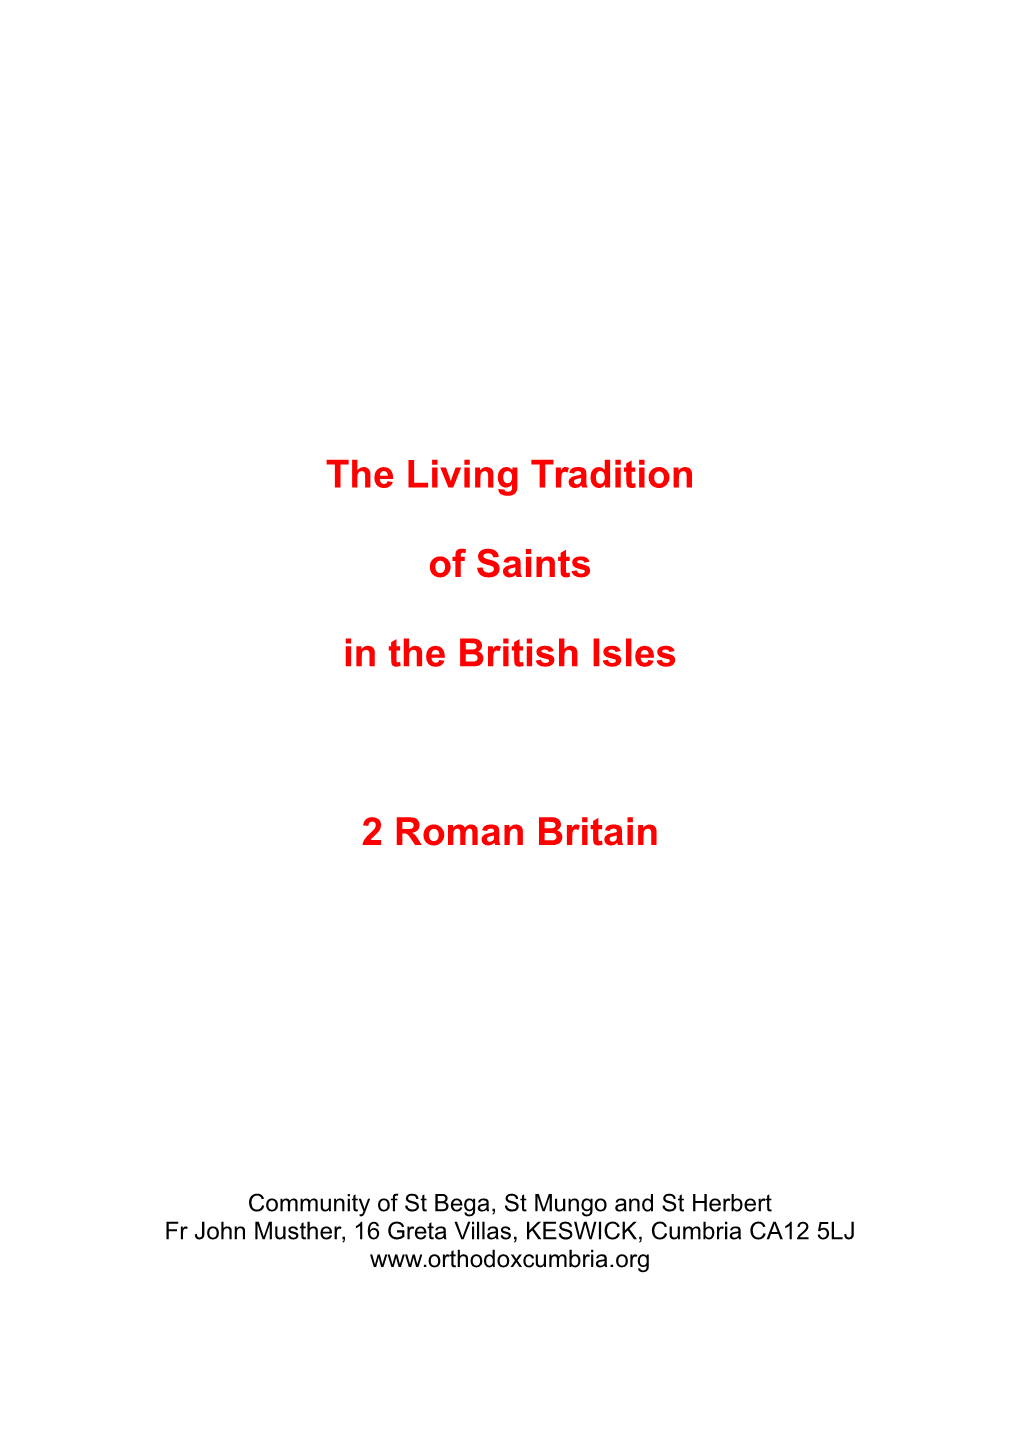 The Living Tradition of Saints in the British Isles 2 Roman Britain